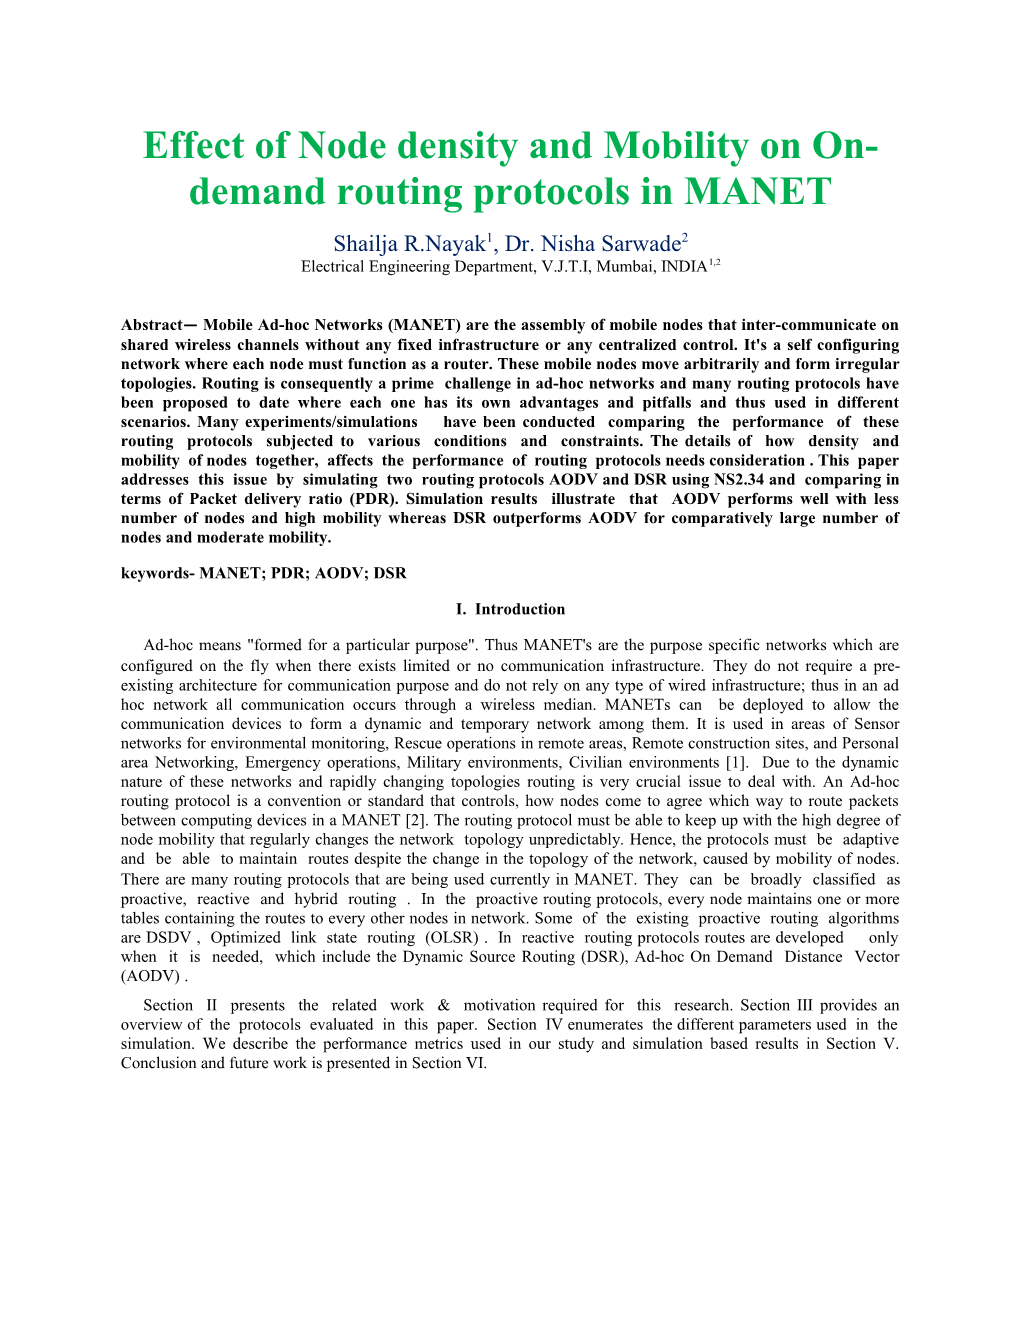 Effect of Node Density and Mobility on On-Demand Routing Protocols in MANET